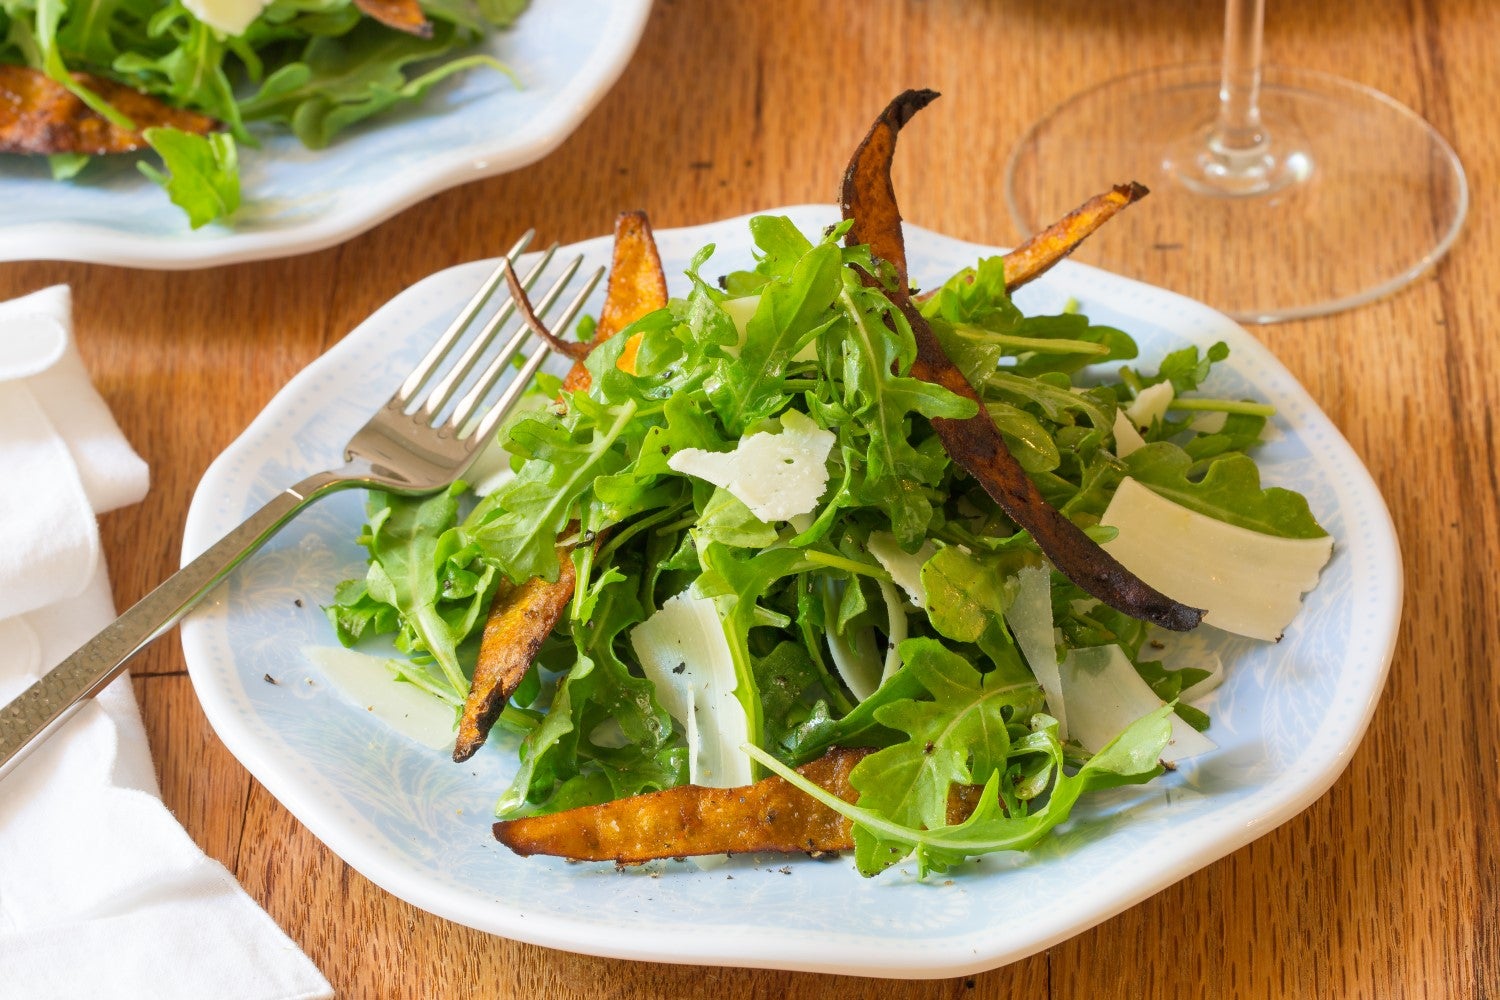 Arugula Salad with Shaved Parm and Sweet Potato Skins